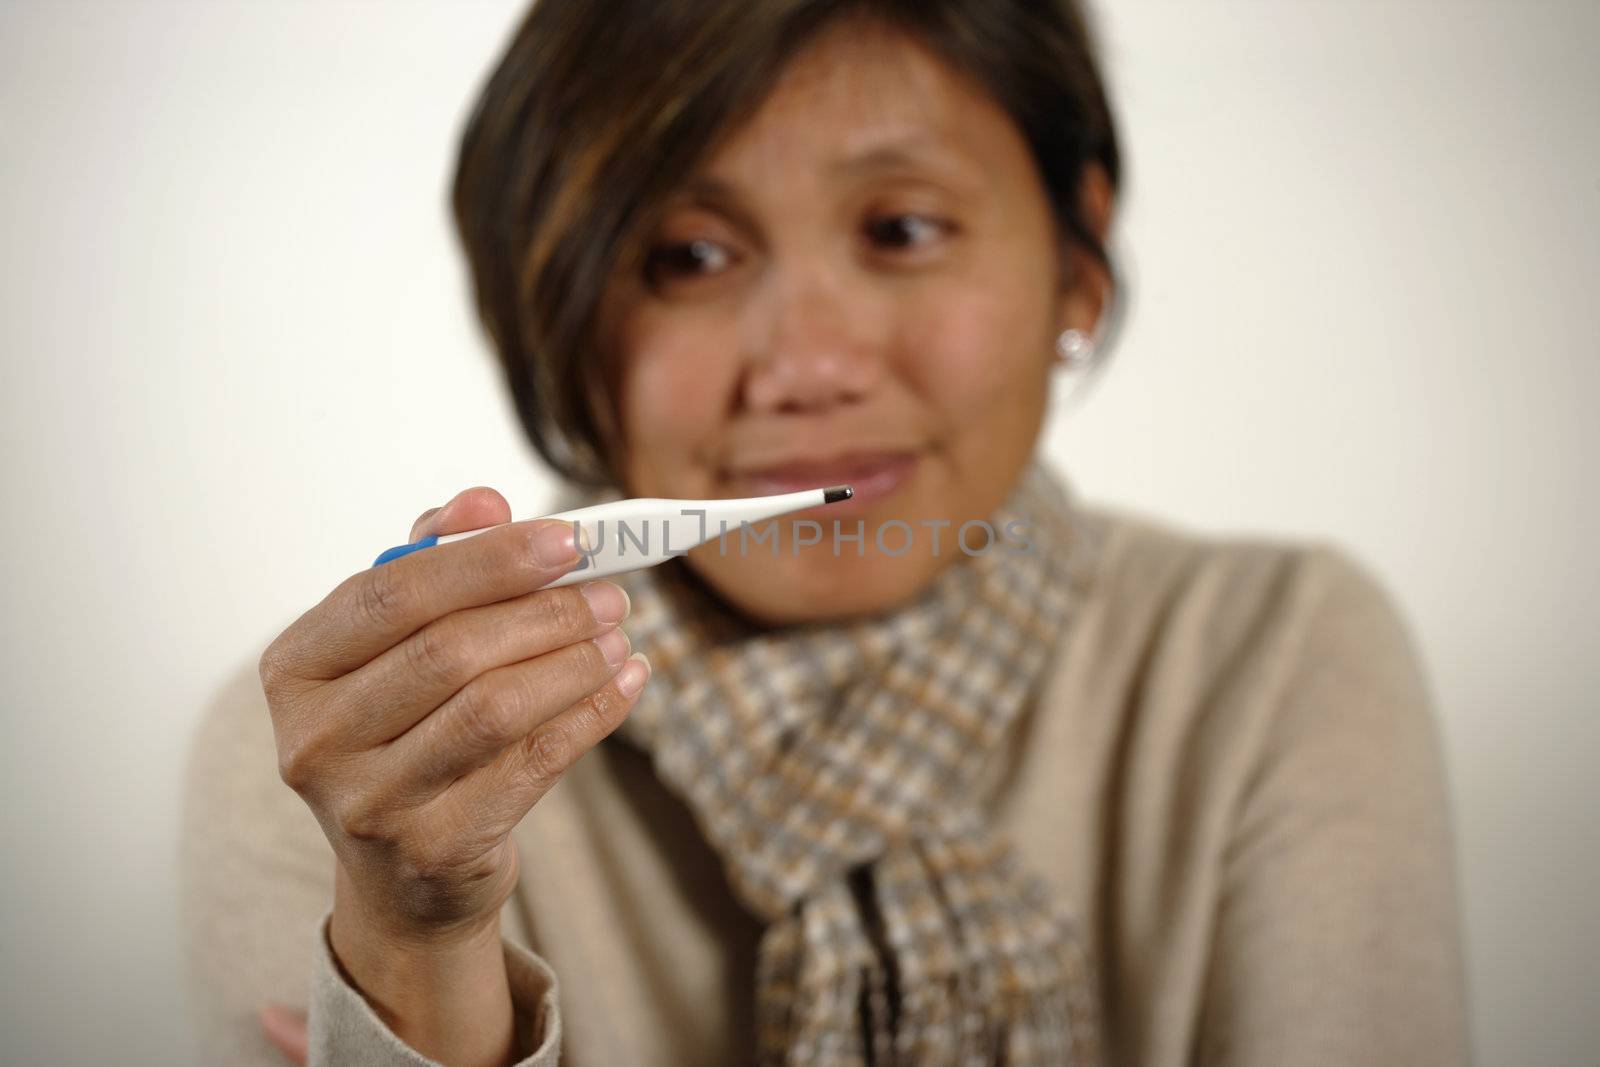 Asian female checking the temperature on a digital thermometer.  Women is out of focus - focus is on her hand and thermometer.
